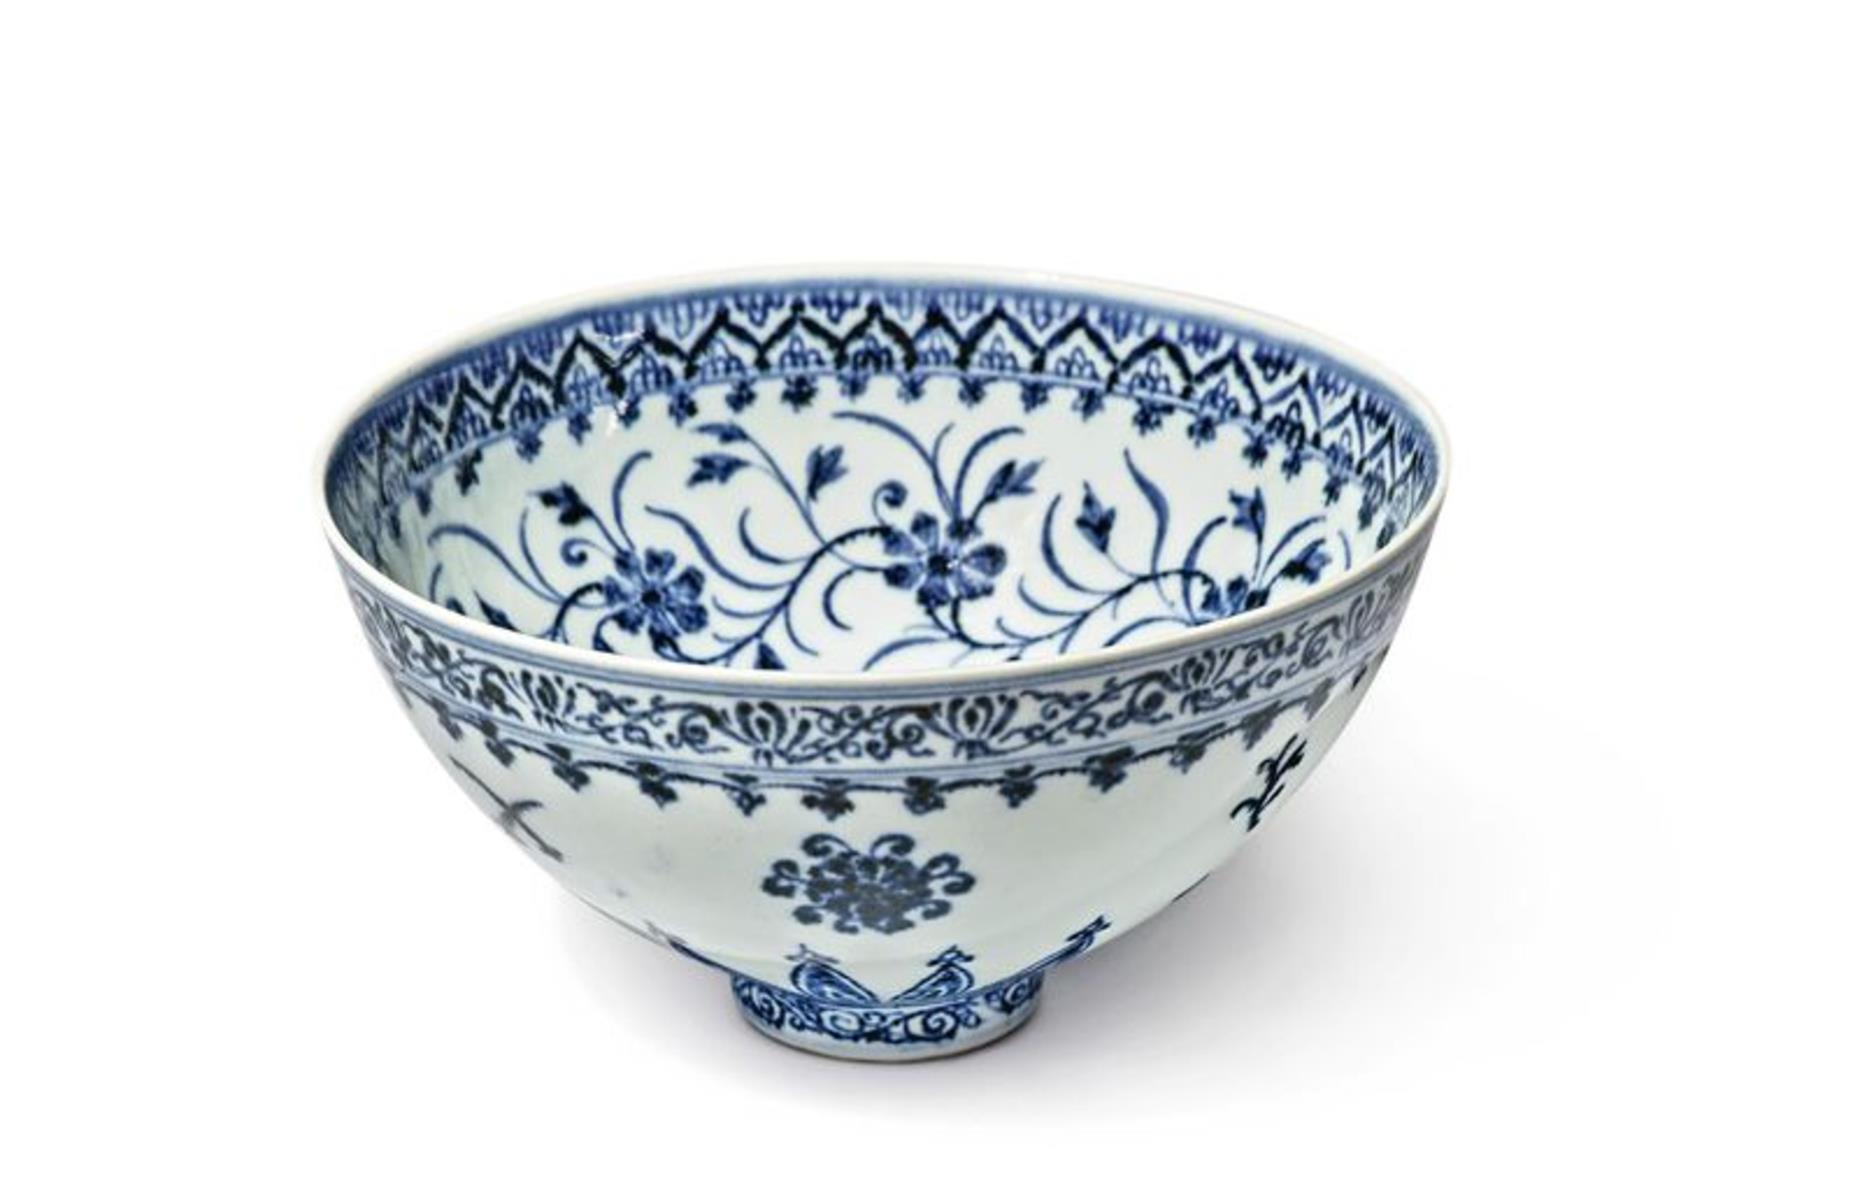 The yard sale Chinese bowl sold for $722,000 